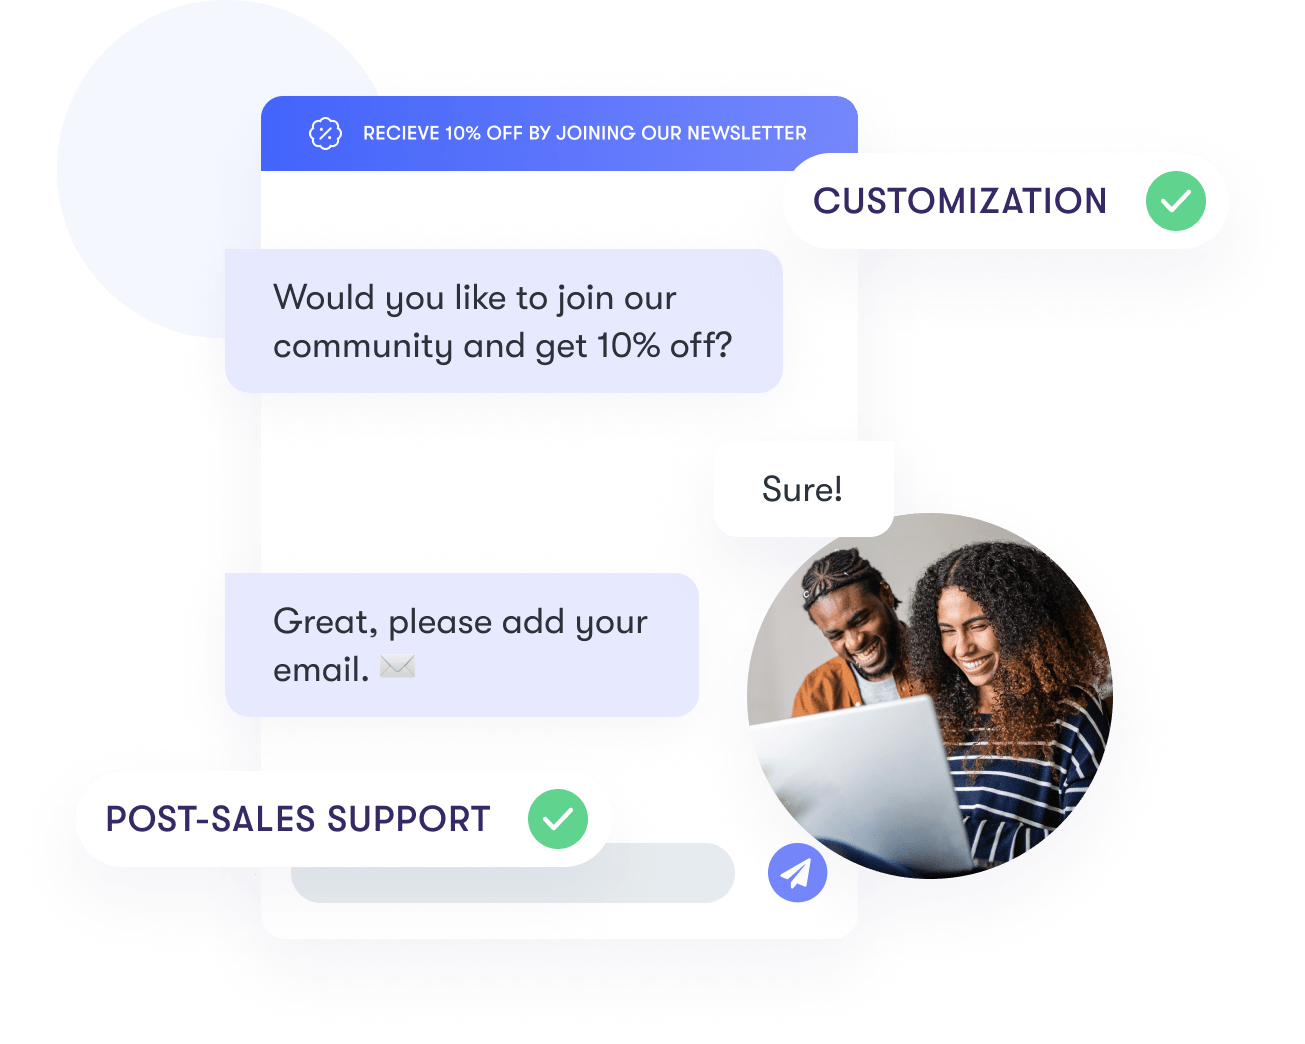 Multilingual Artificial Intelligence chatbots Platform for ecommerce. Software for creating and management of virtual agents. Improve customer satisfaction, cut costs, increase revenue. 